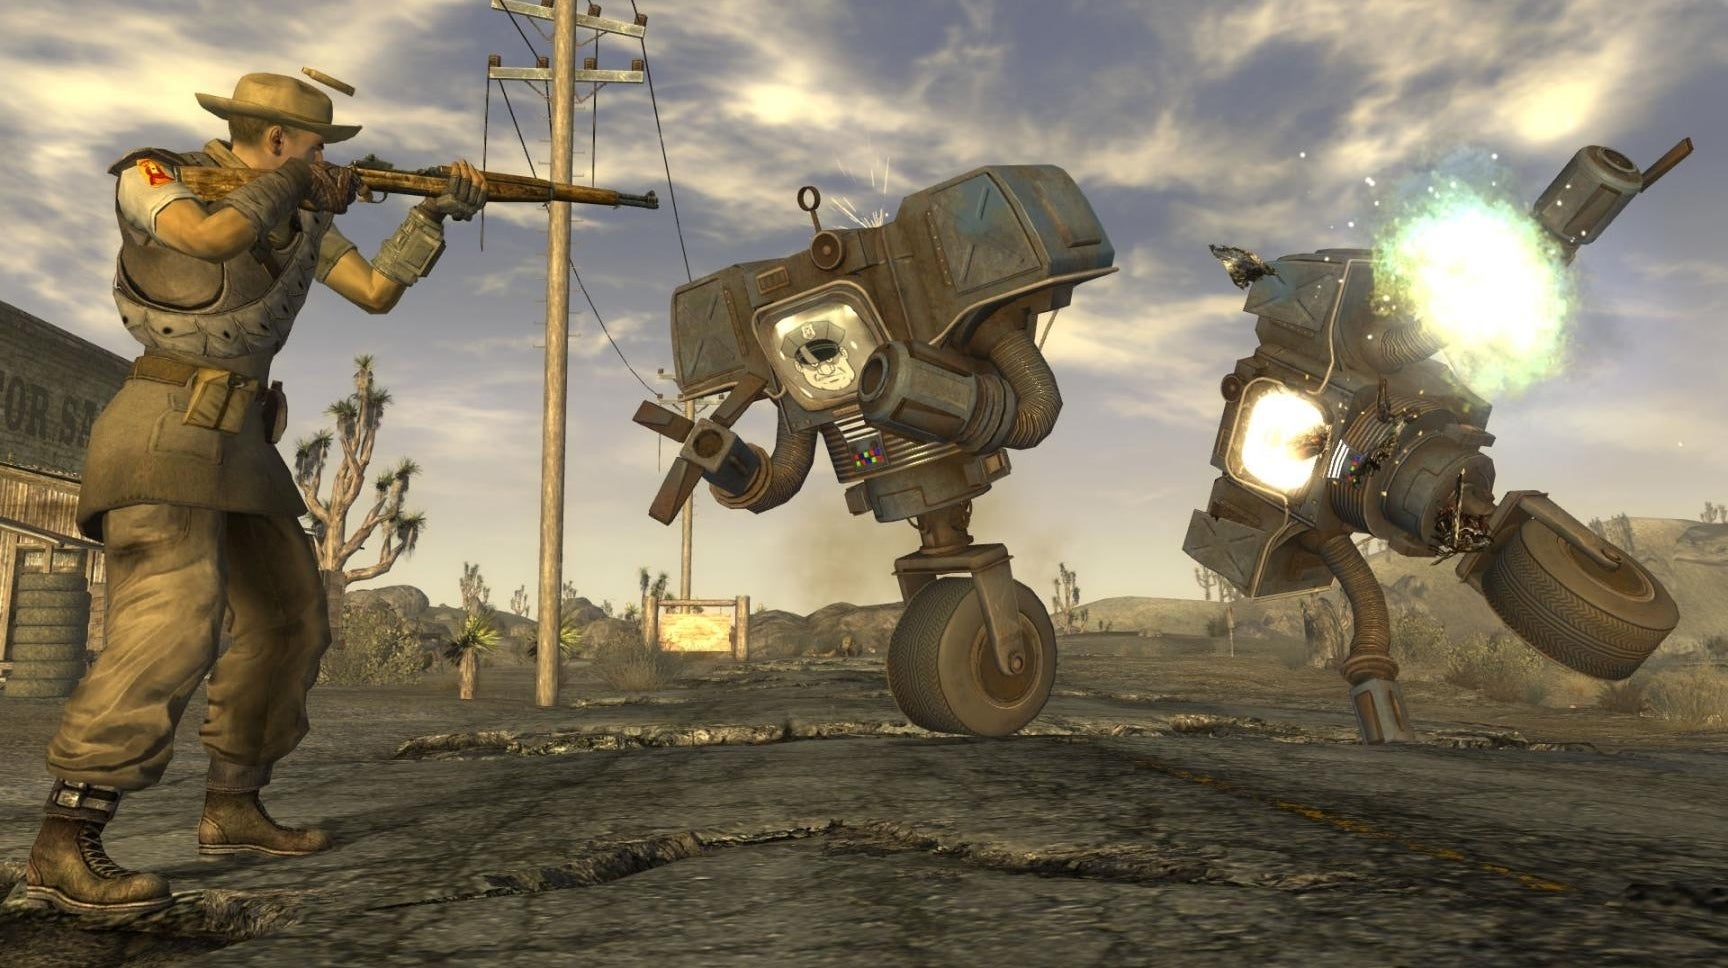 Image for As Fallout New Vegas turns 10 years old, let's remember why it's great